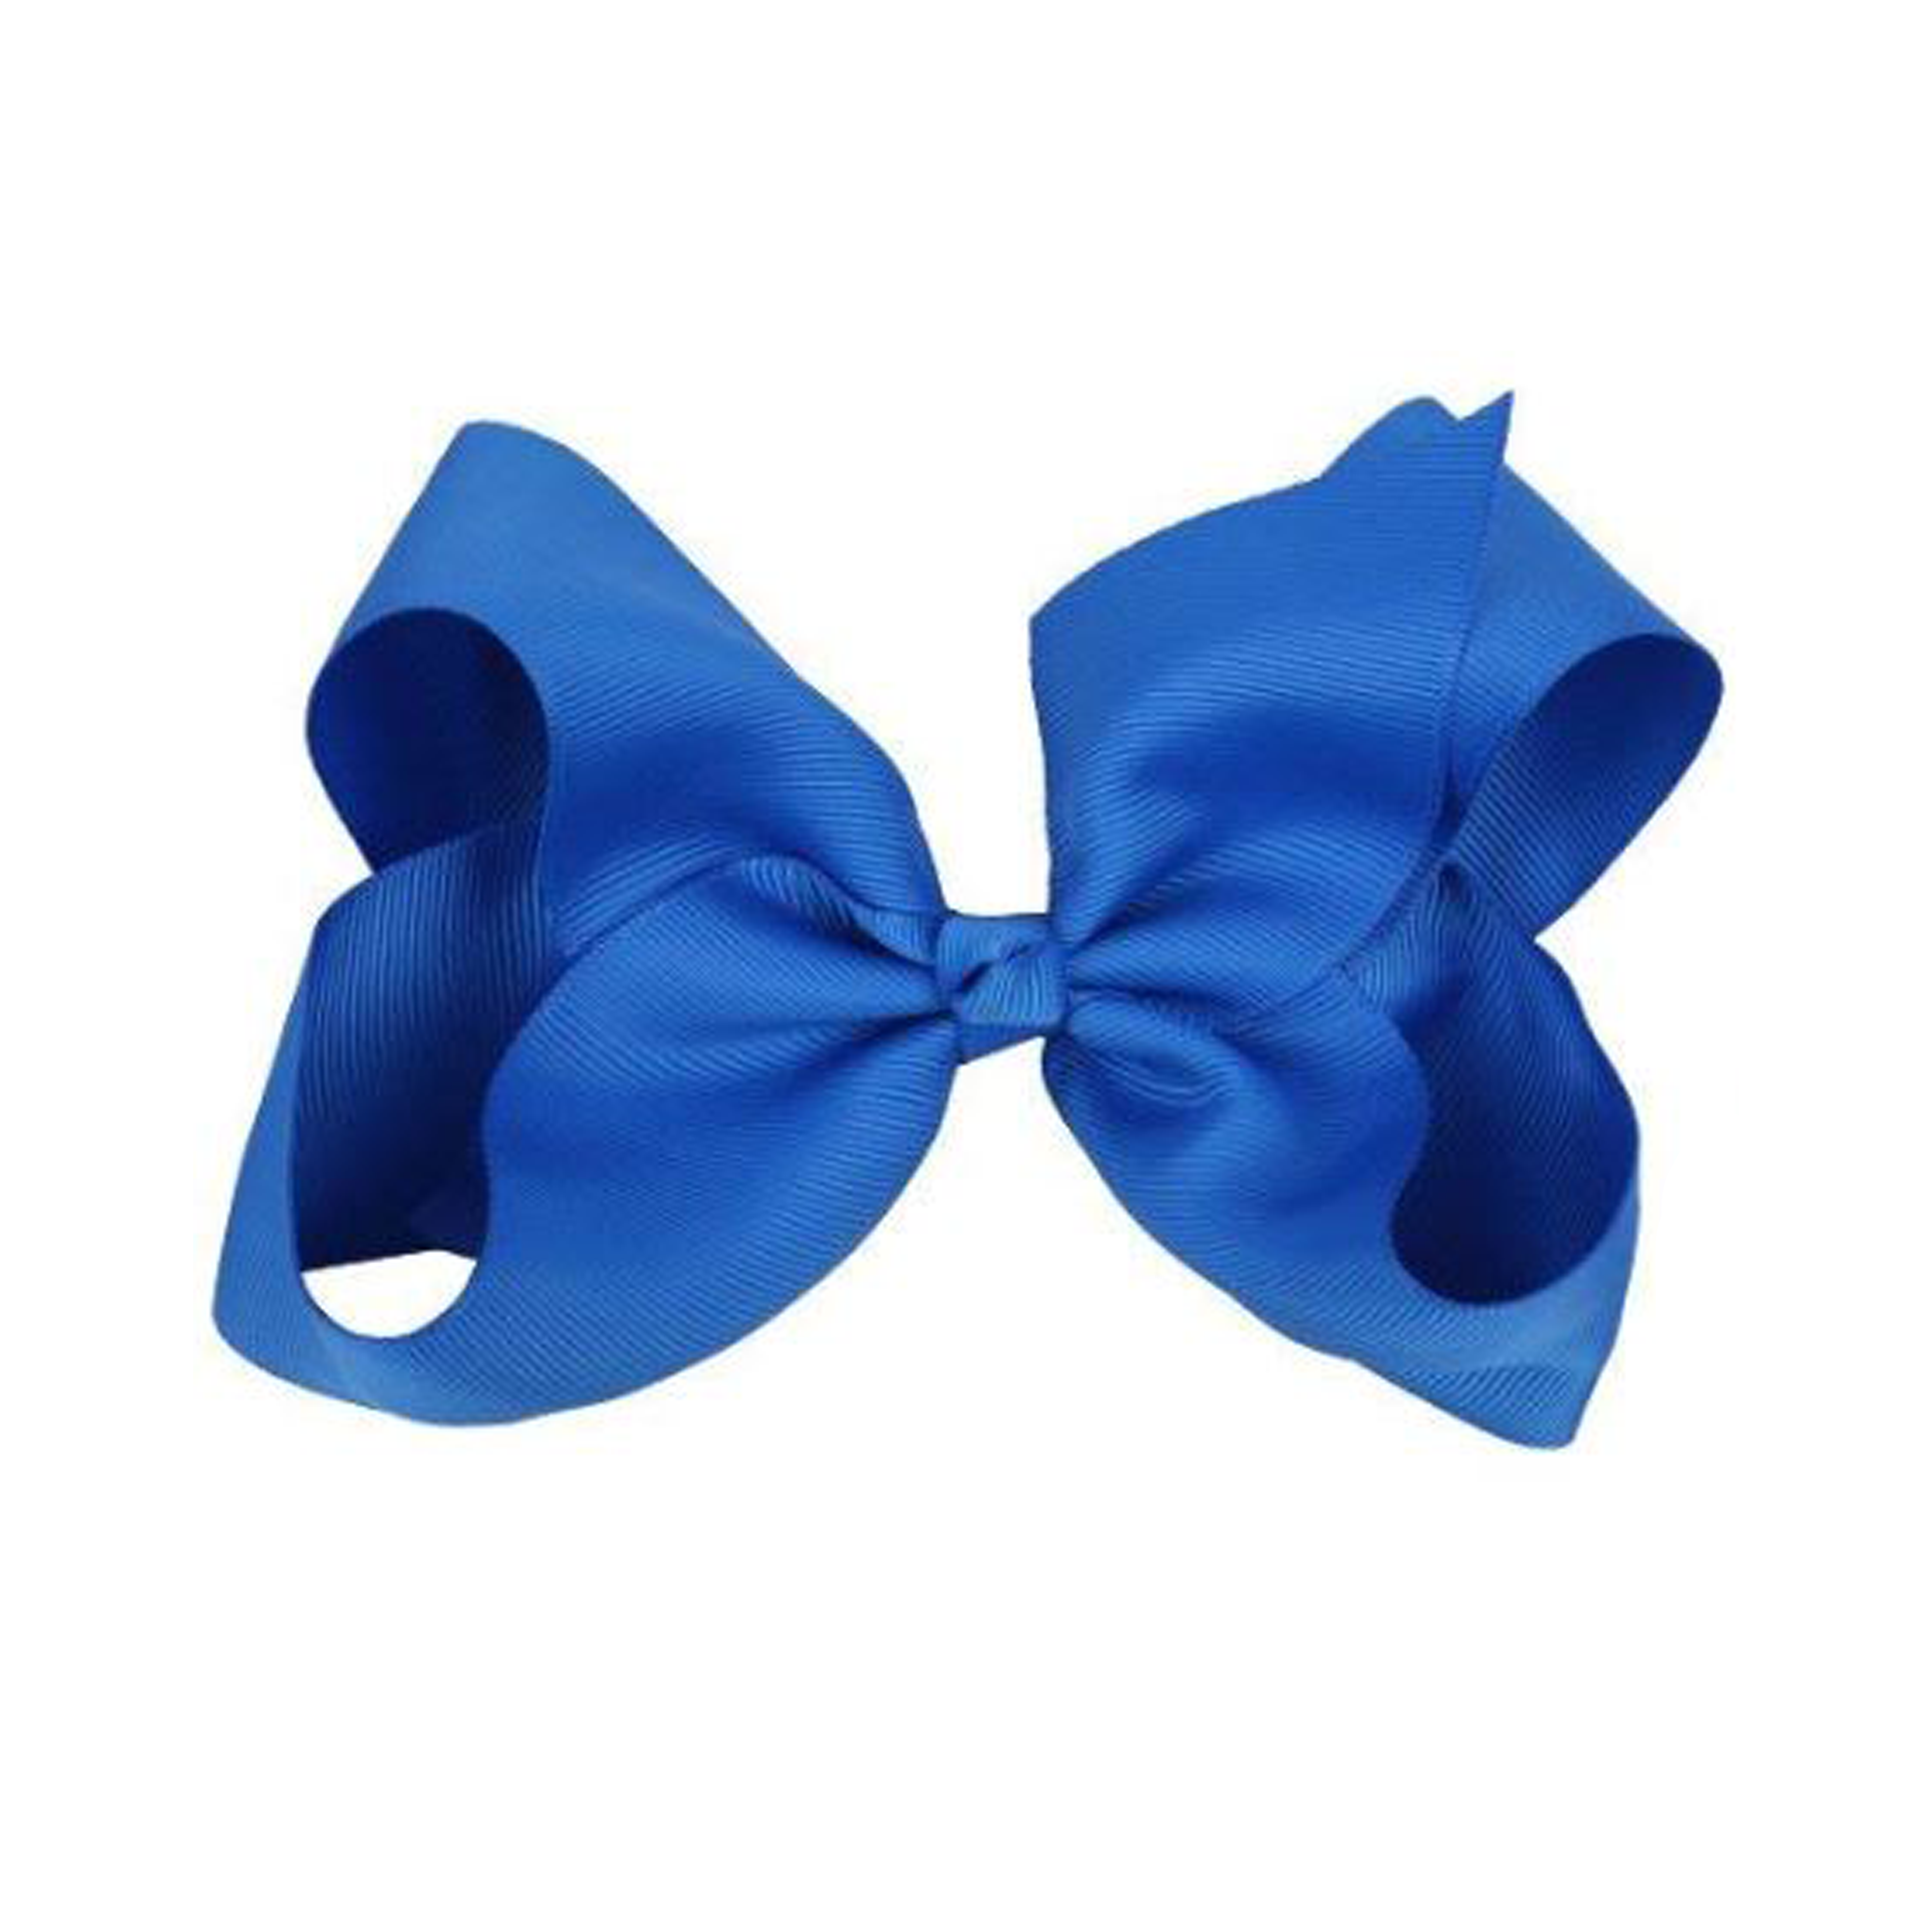  Victory Bows Large 7 Red Hair Bow made with 3 Grosgrain  Ribbon- The Anna-Made in USA French Clip XLB150 : Beauty & Personal Care